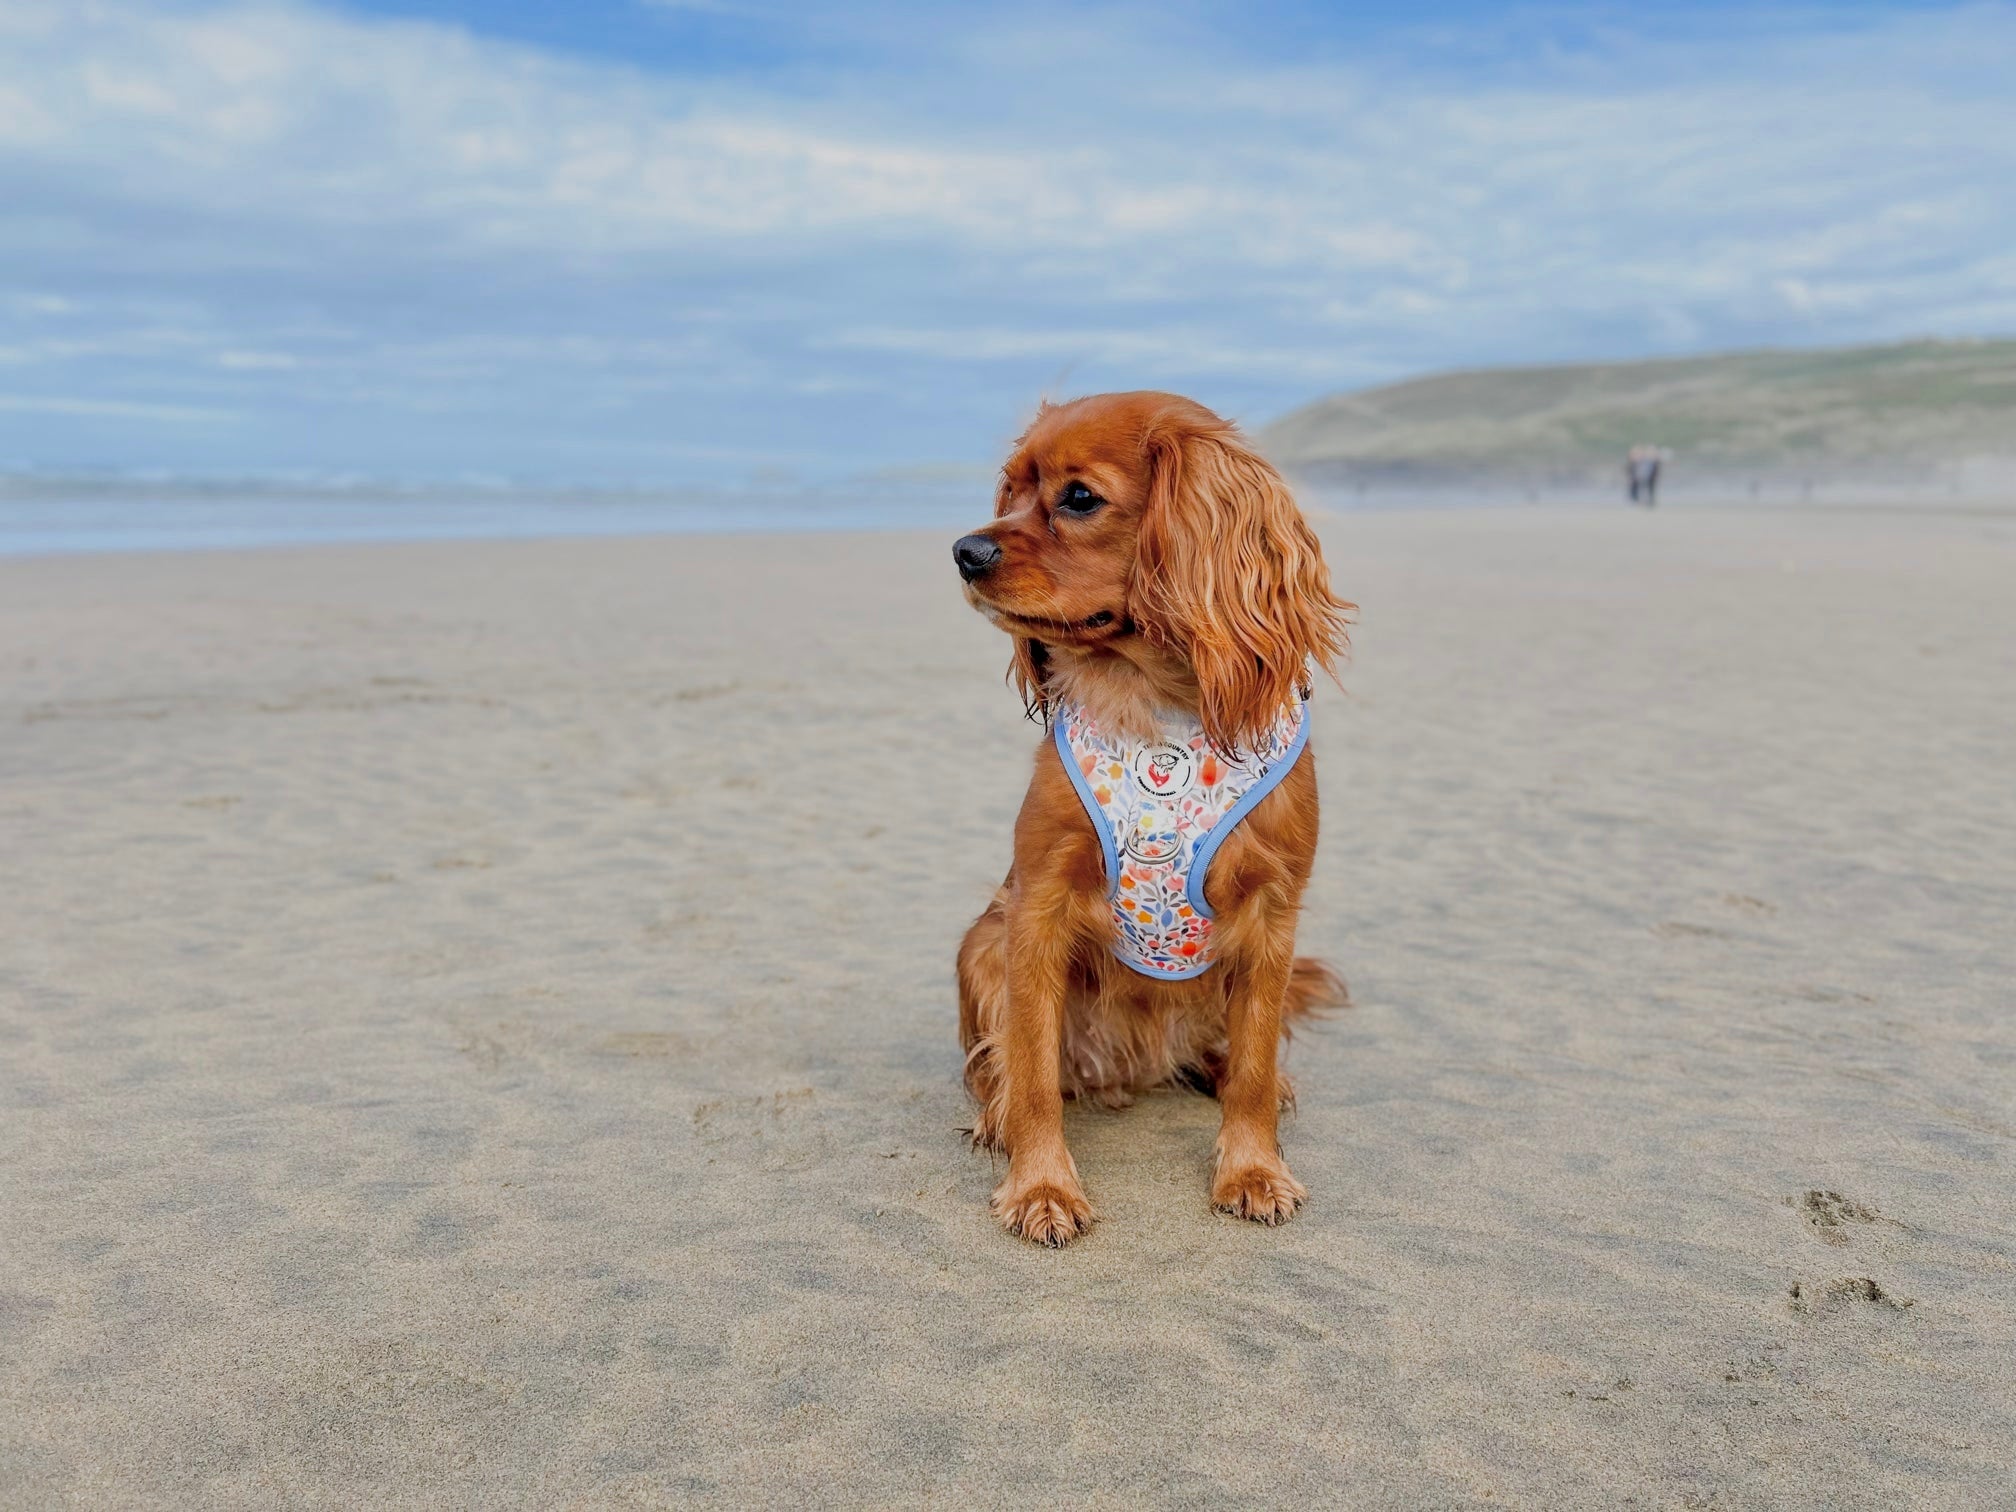 Red cavalier Charles spaniel sat on perranporth beach wearing our new Mabel floral harness.